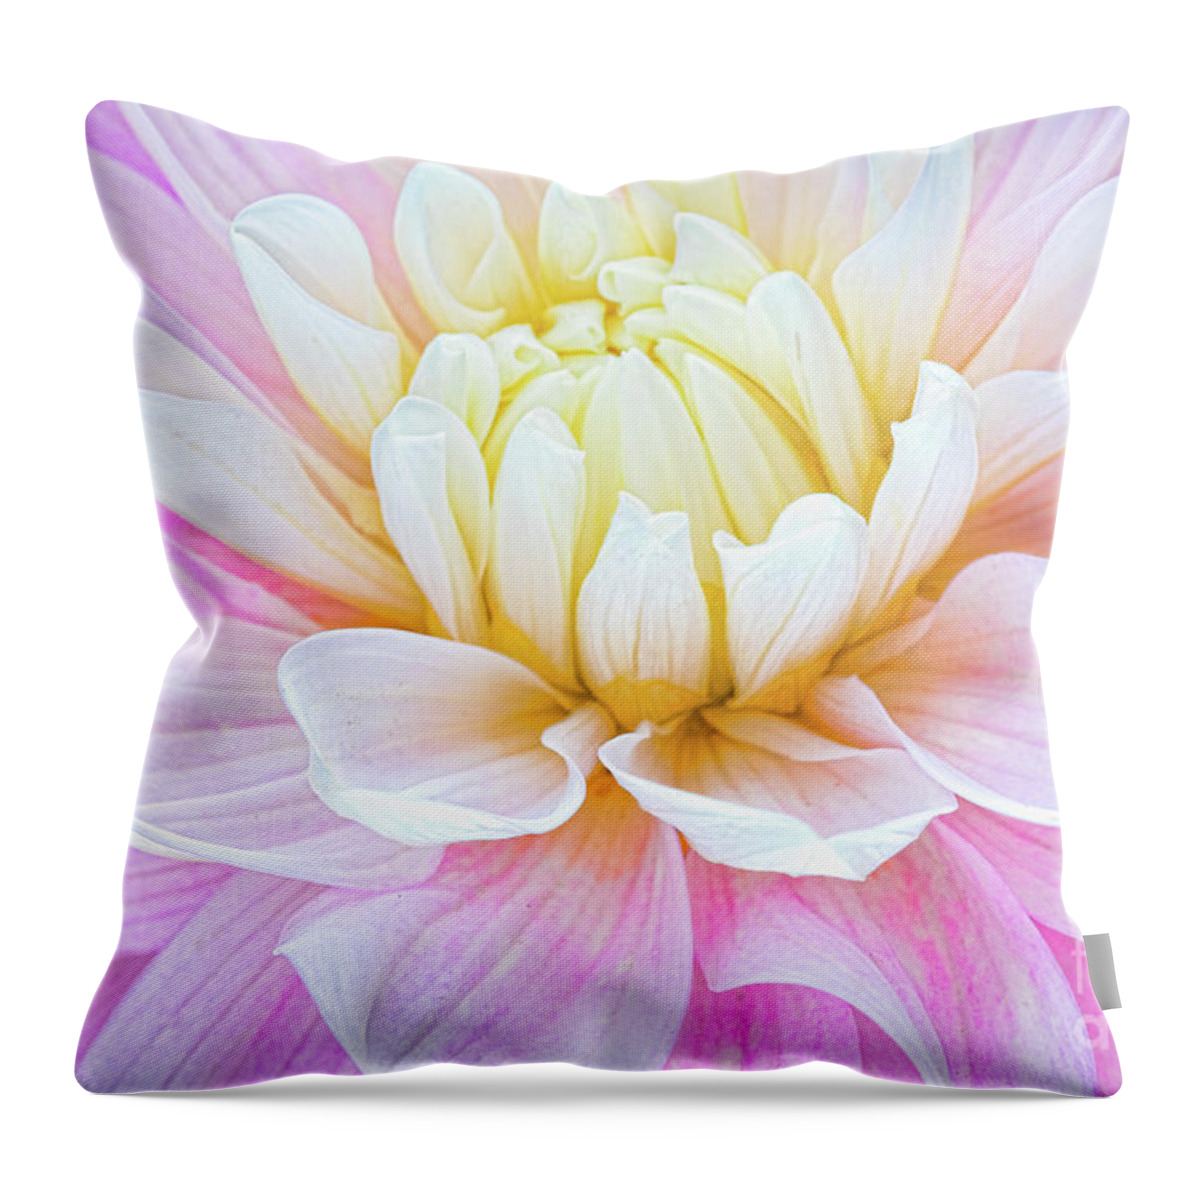 Dahlias Throw Pillow featuring the photograph Pillow Dreams by Marilyn Cornwell